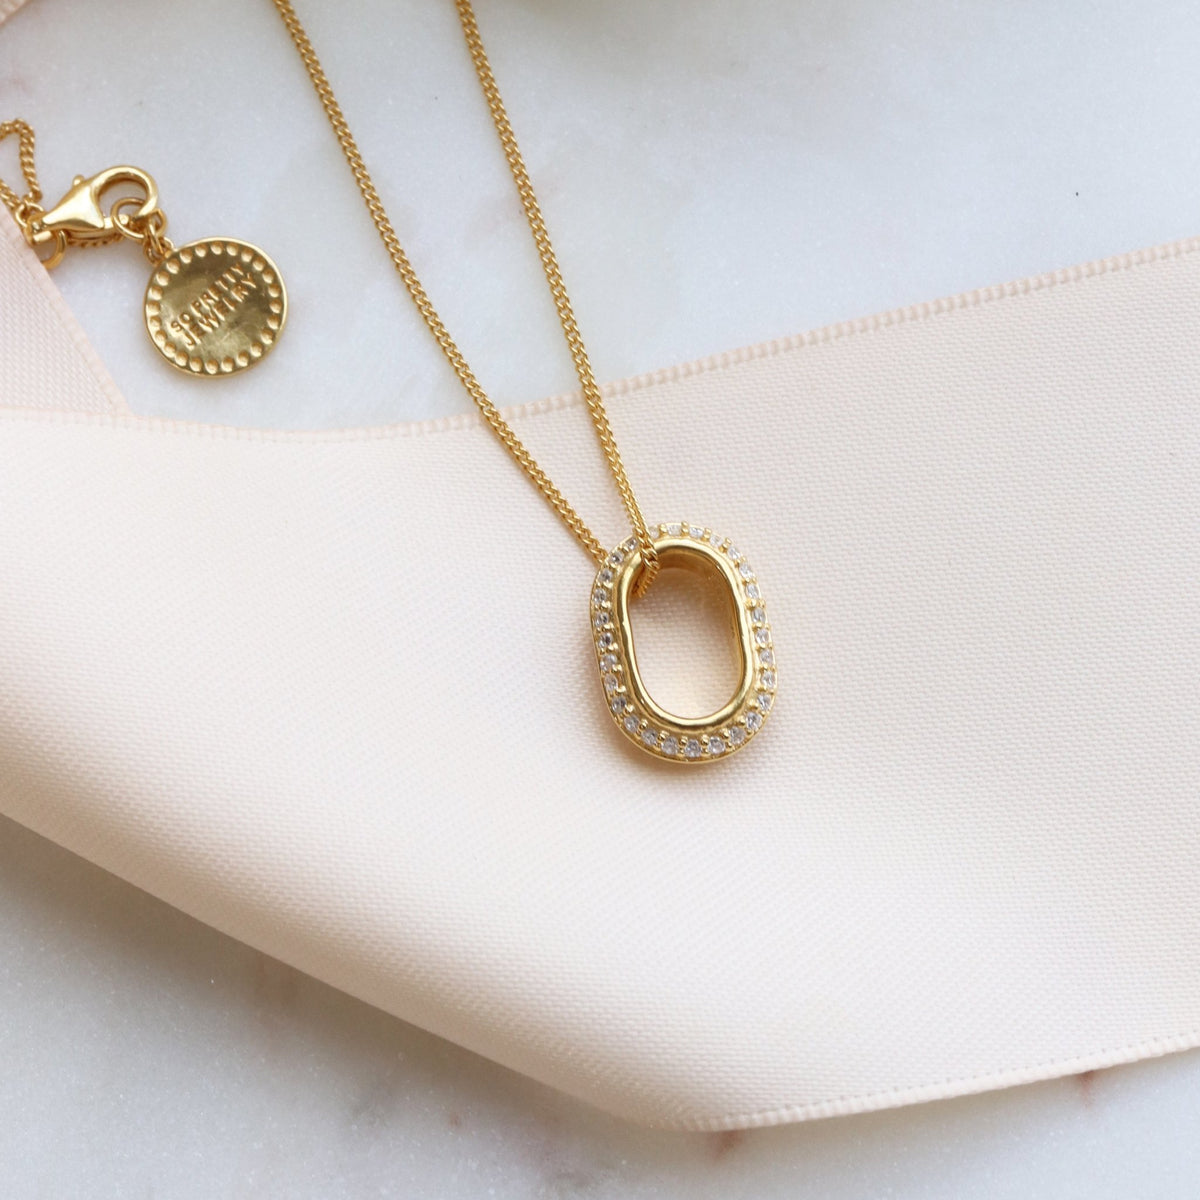 LOVE ETERNITY OVAL PENDANT NECKLACE - CUBIC ZIRCONIA &amp; GOLD - SO PRETTY CARA COTTER